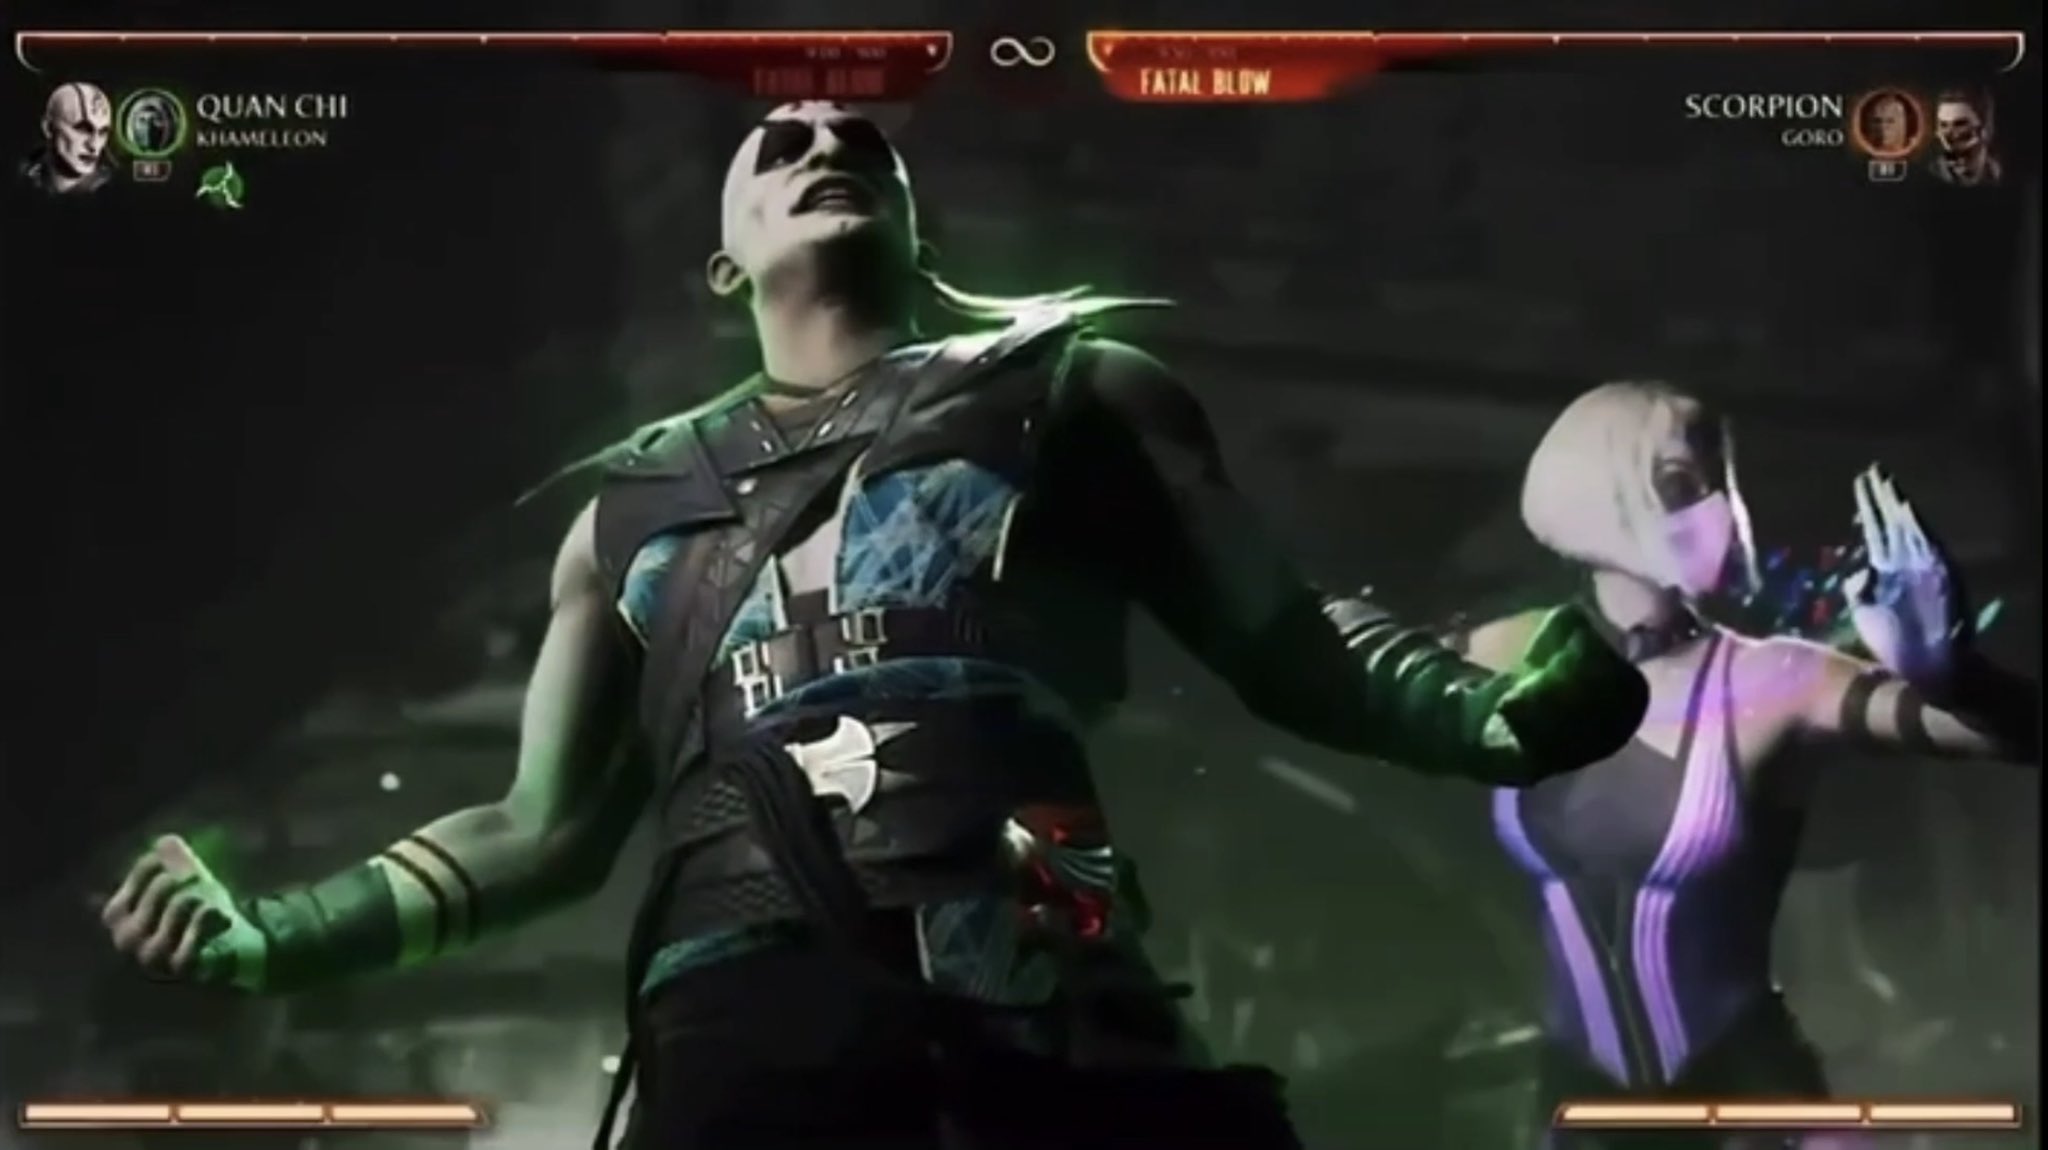 Here is Quan Chi's second Fatality in Mortal Kombat 1 and how to